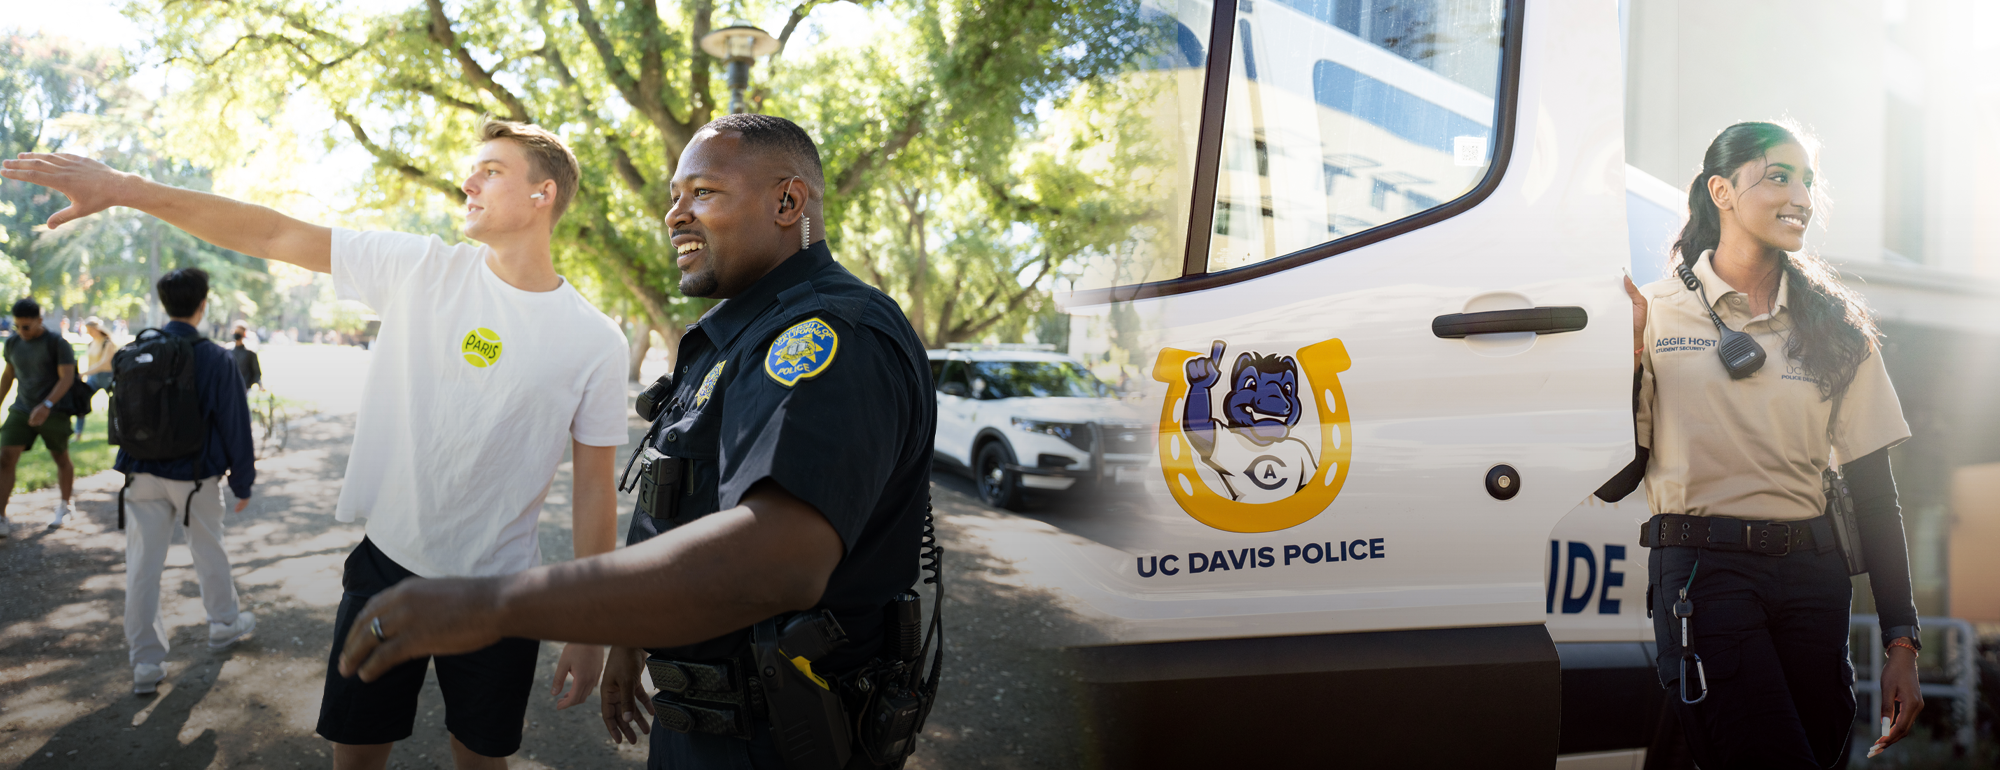 Collage with image of police officer and student smiling on the Quad together and an image of an Aggie Host smiling while opening the door of a Safe Ride van.